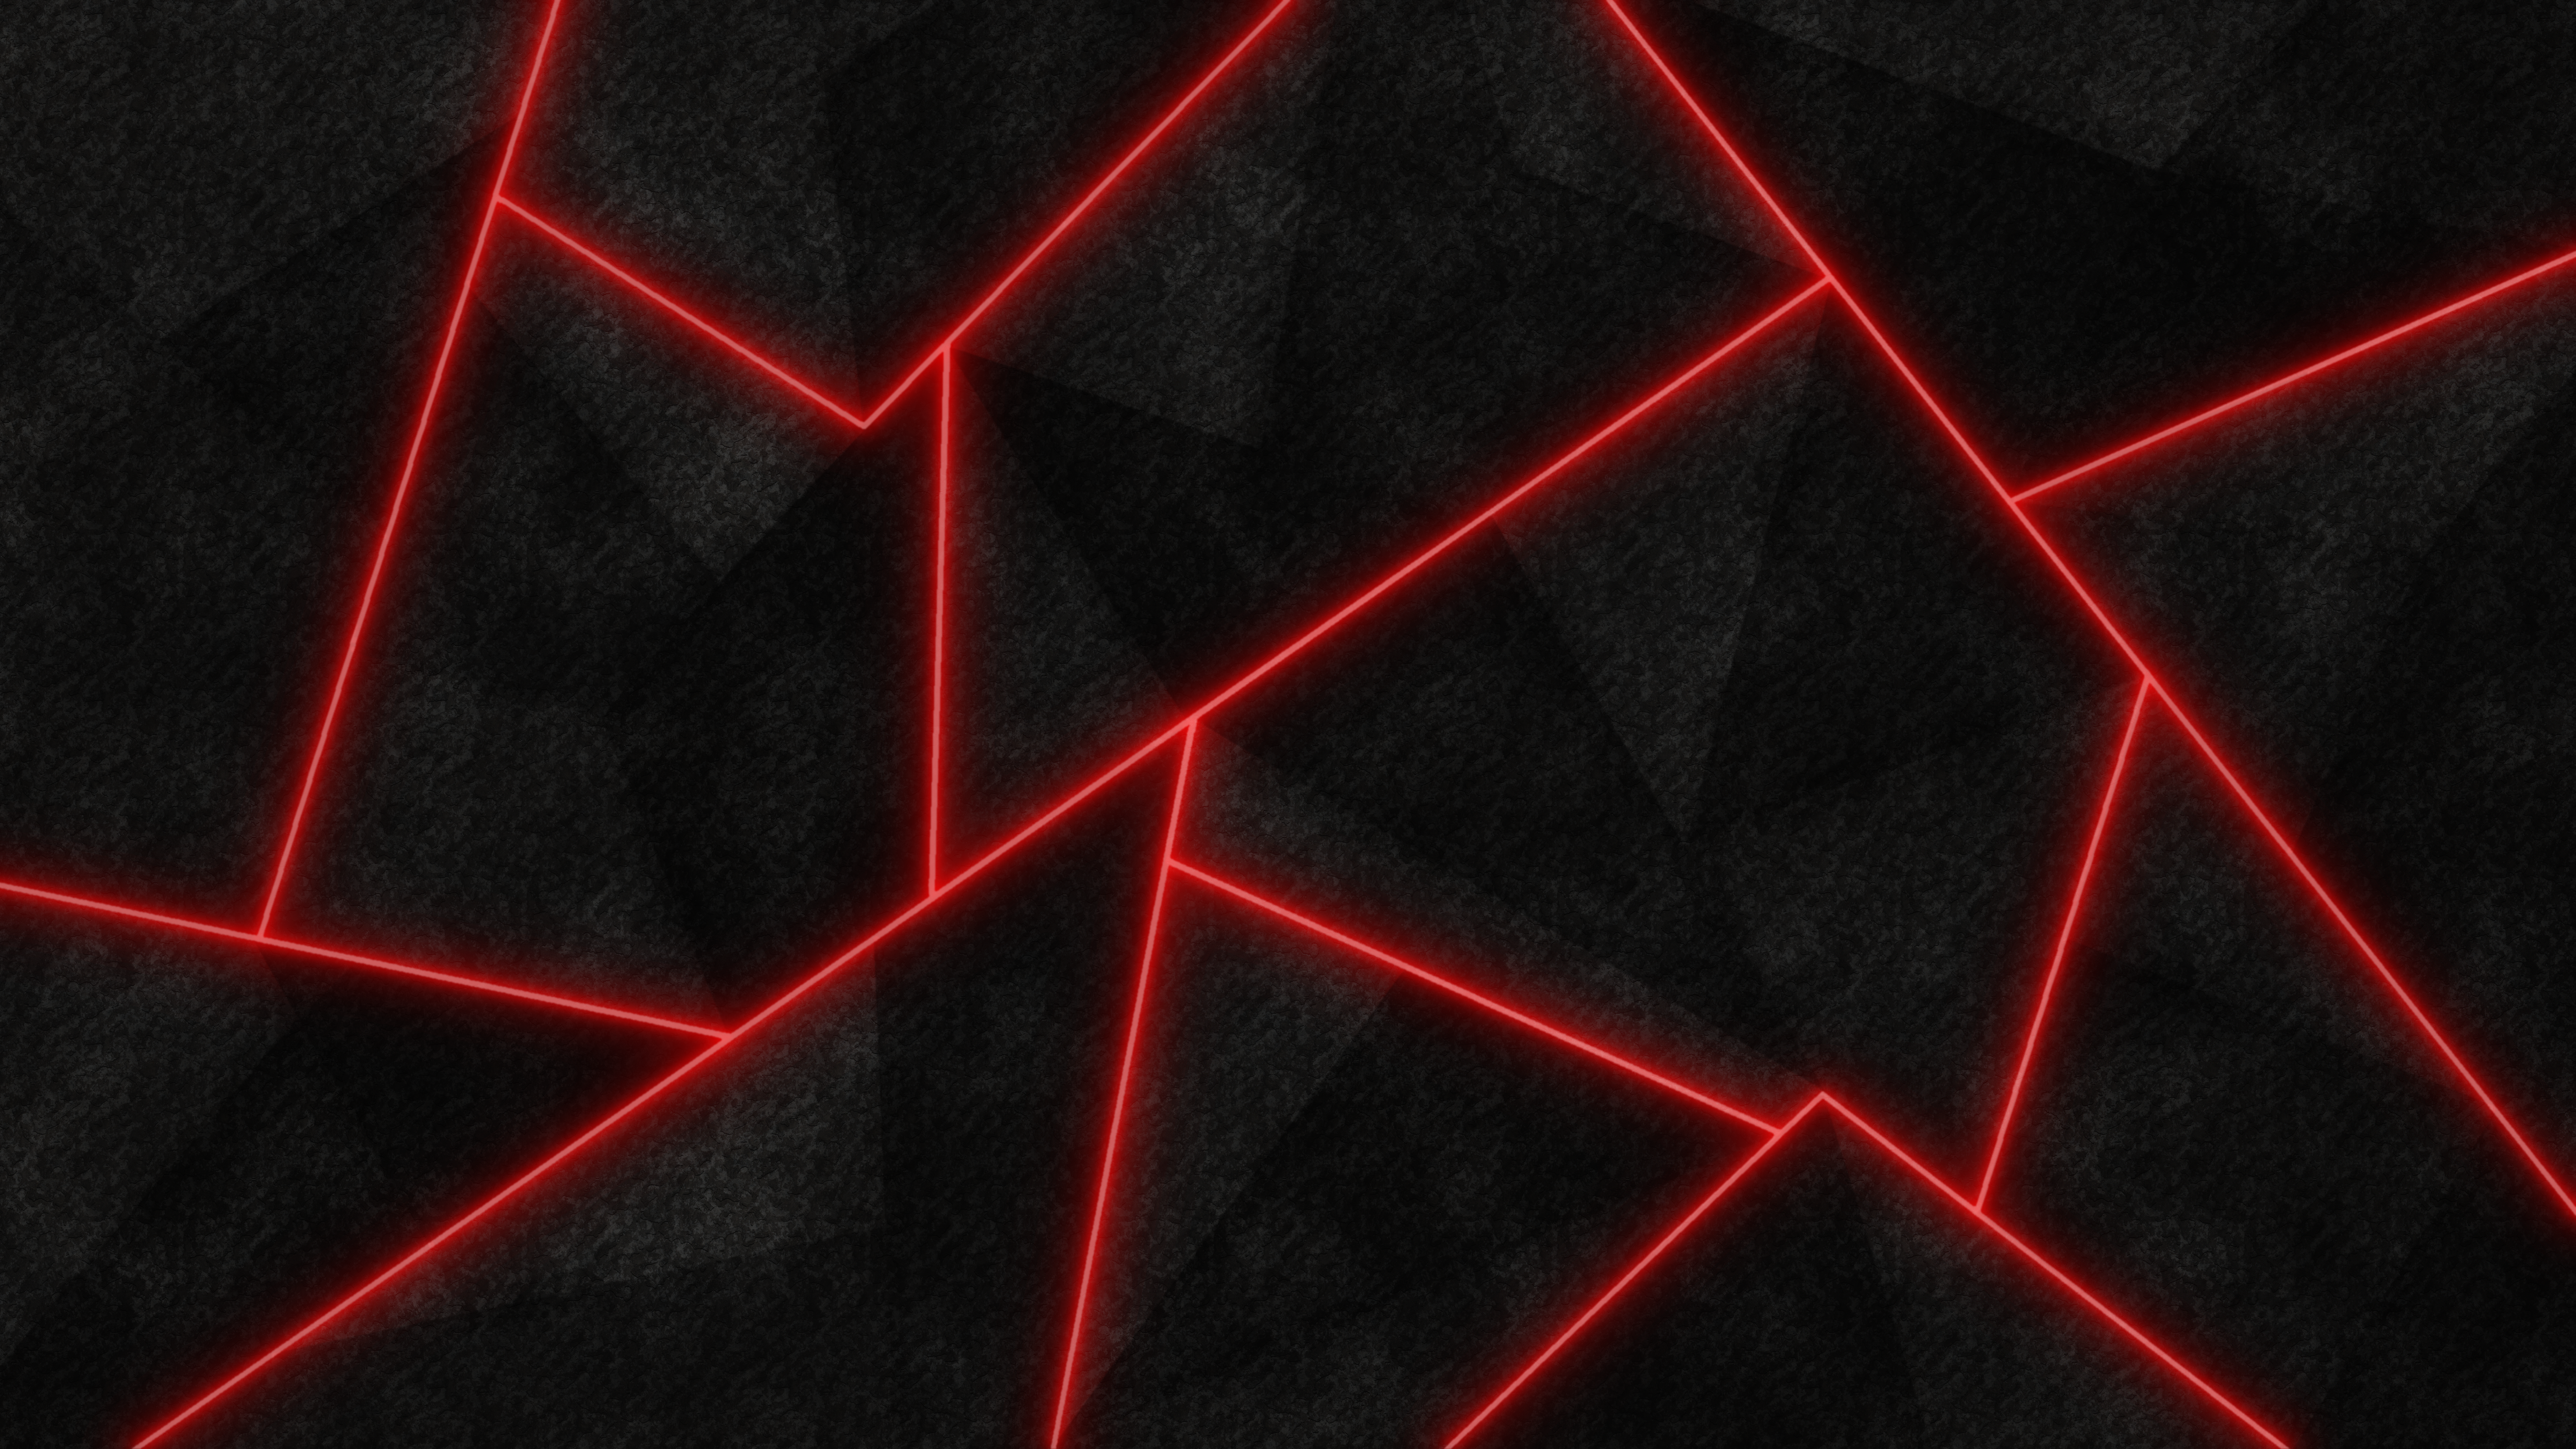 Black Red Shapes 7680x4320